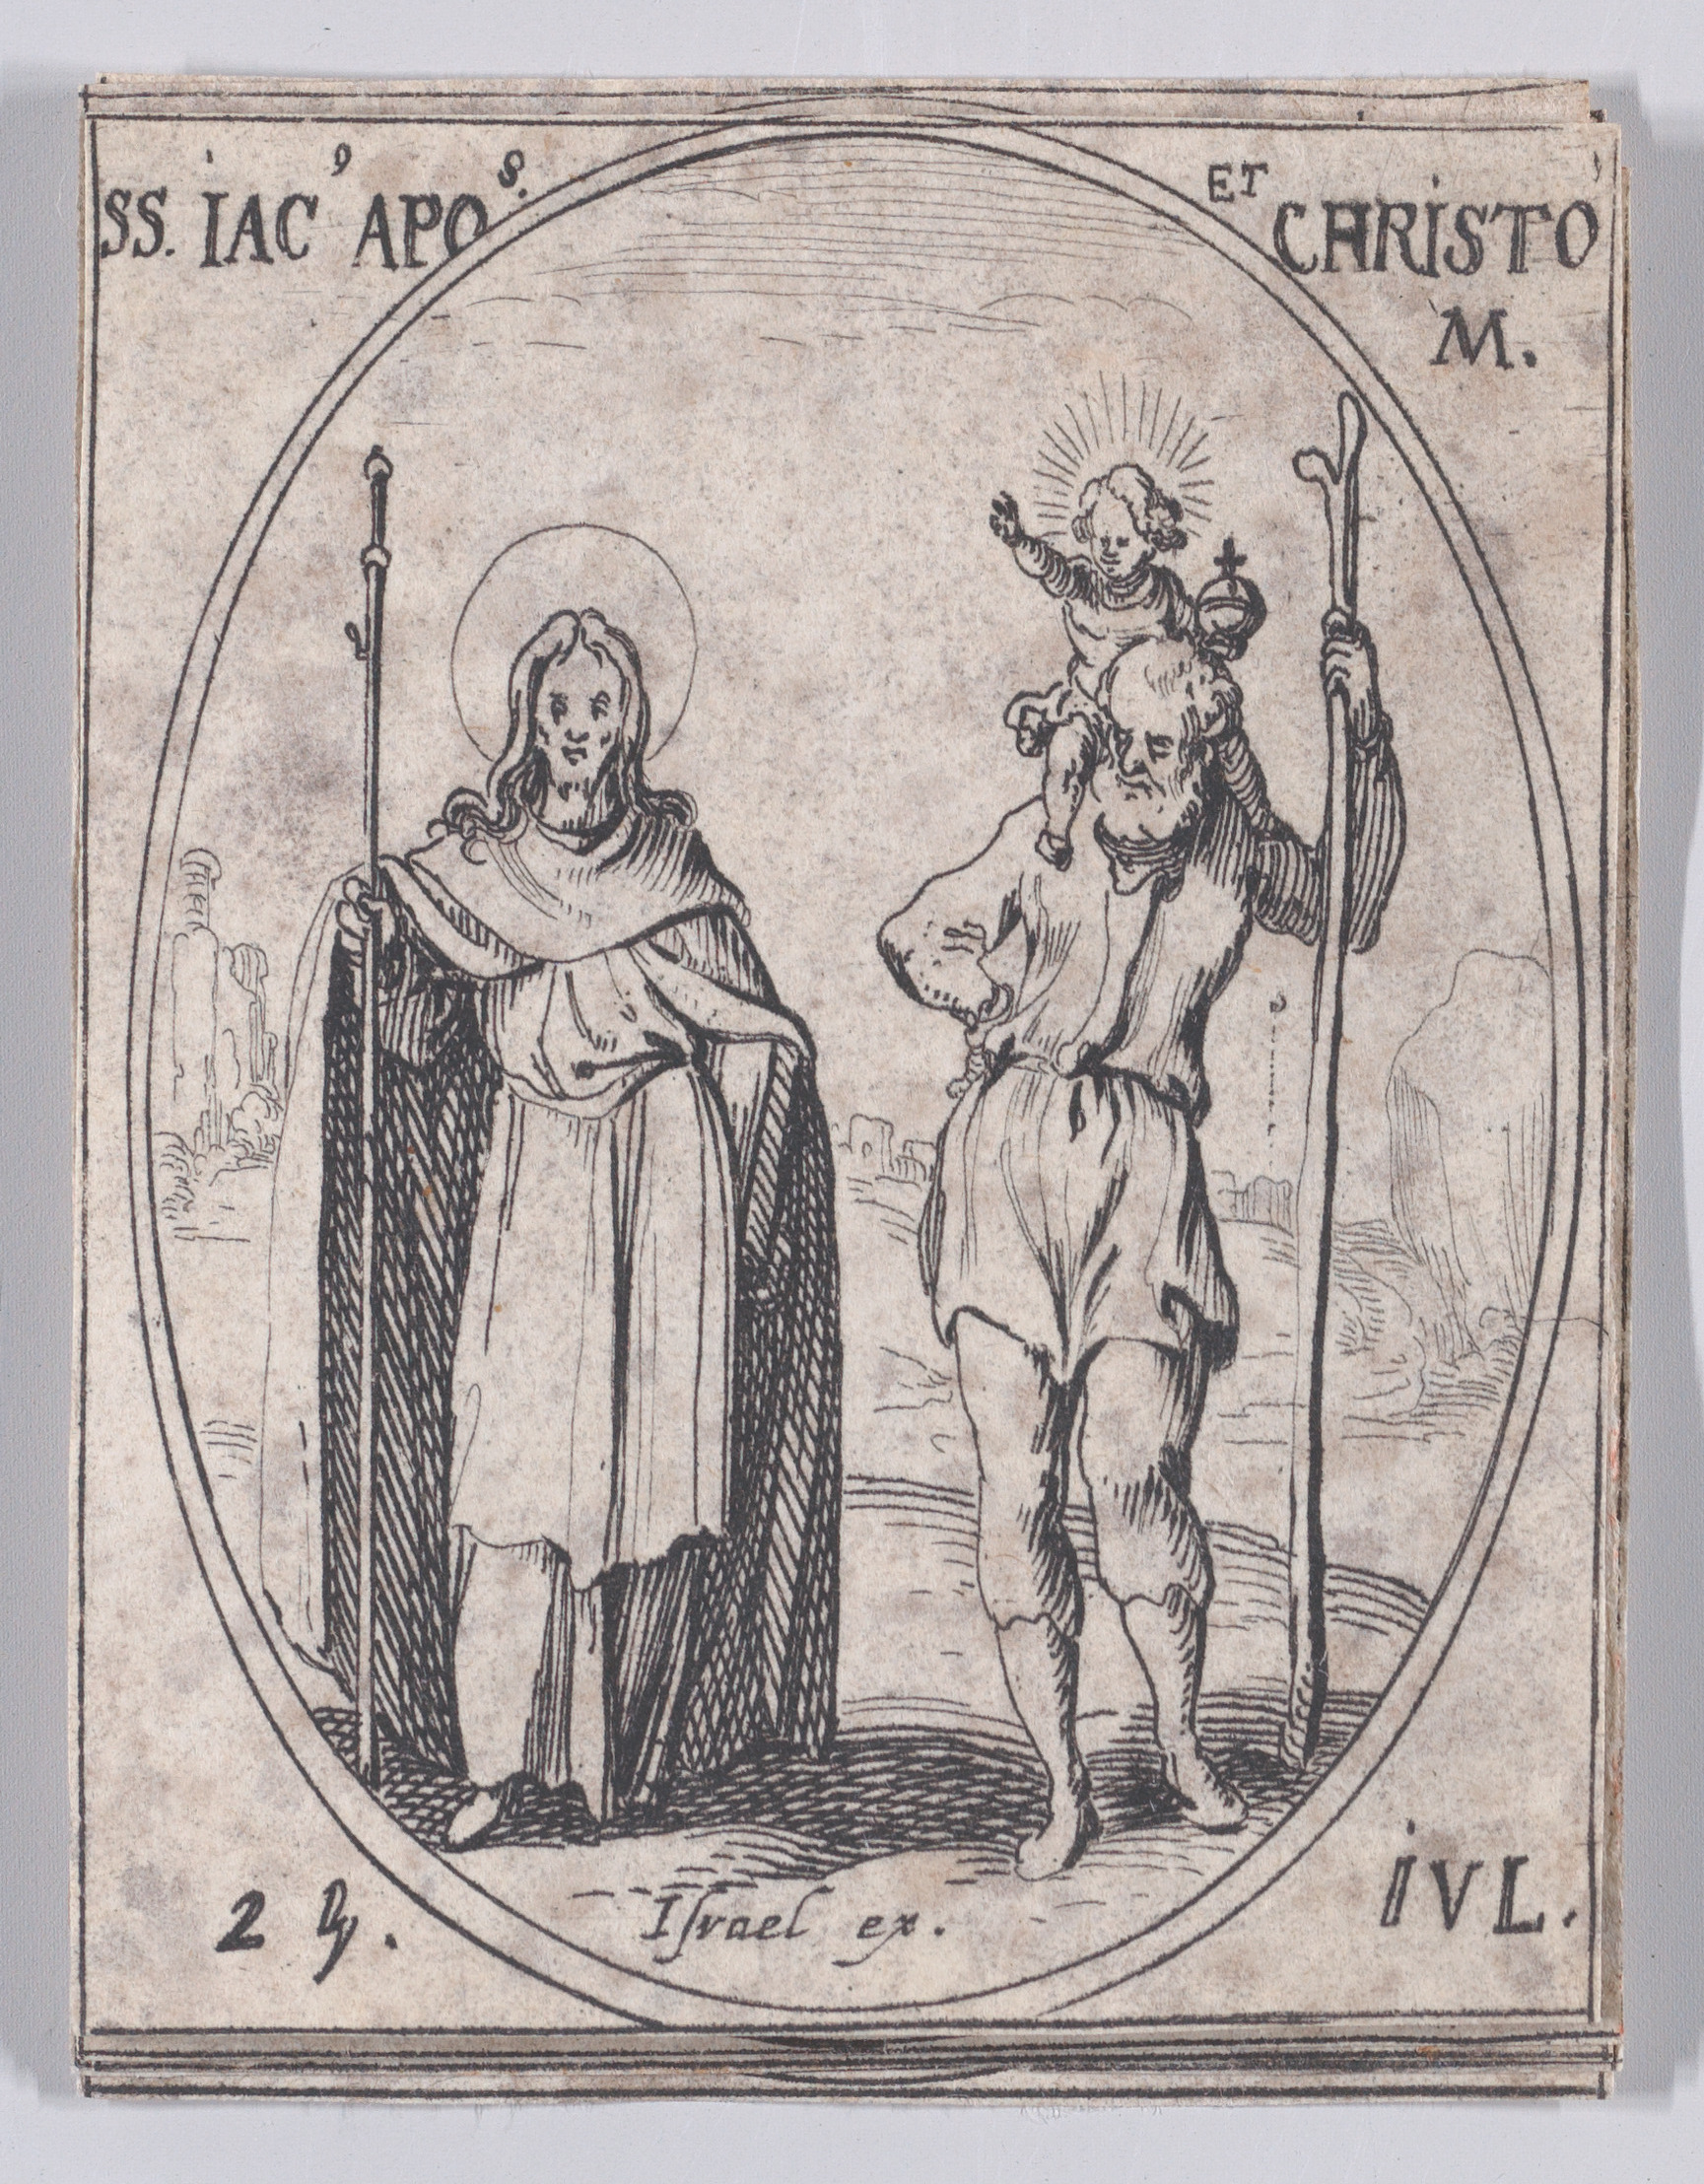 S. Jacques, apôtre et S. Christope (St. James, Apostle and St. Christopher), July 25th, from Les Images De Tous Les Saincts et Saintes de L'Année (Images of All of the Saints and Religious Events of the Year), Jacques Callot (French, Nancy 1592–1635 Nancy), Etching; second state of two (Lieure)